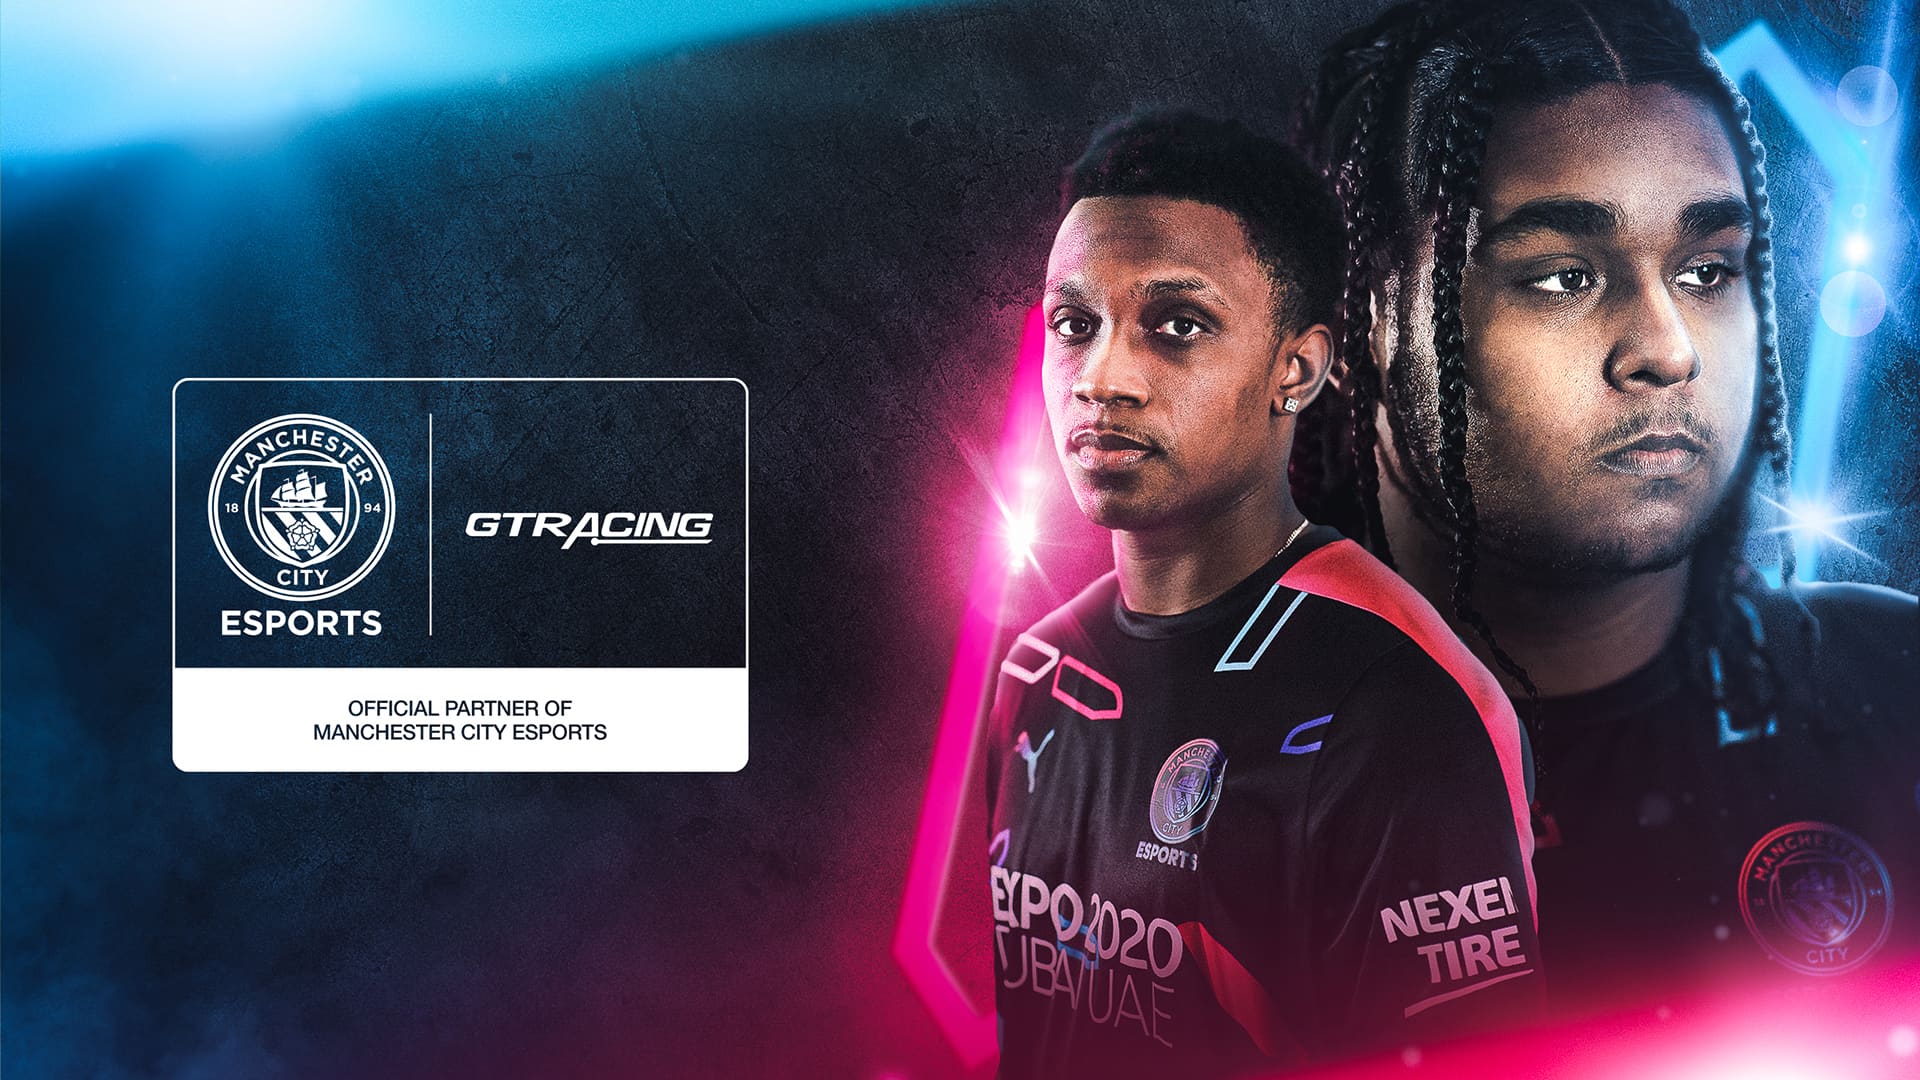 Manchester City Esports teams up with GTRACING